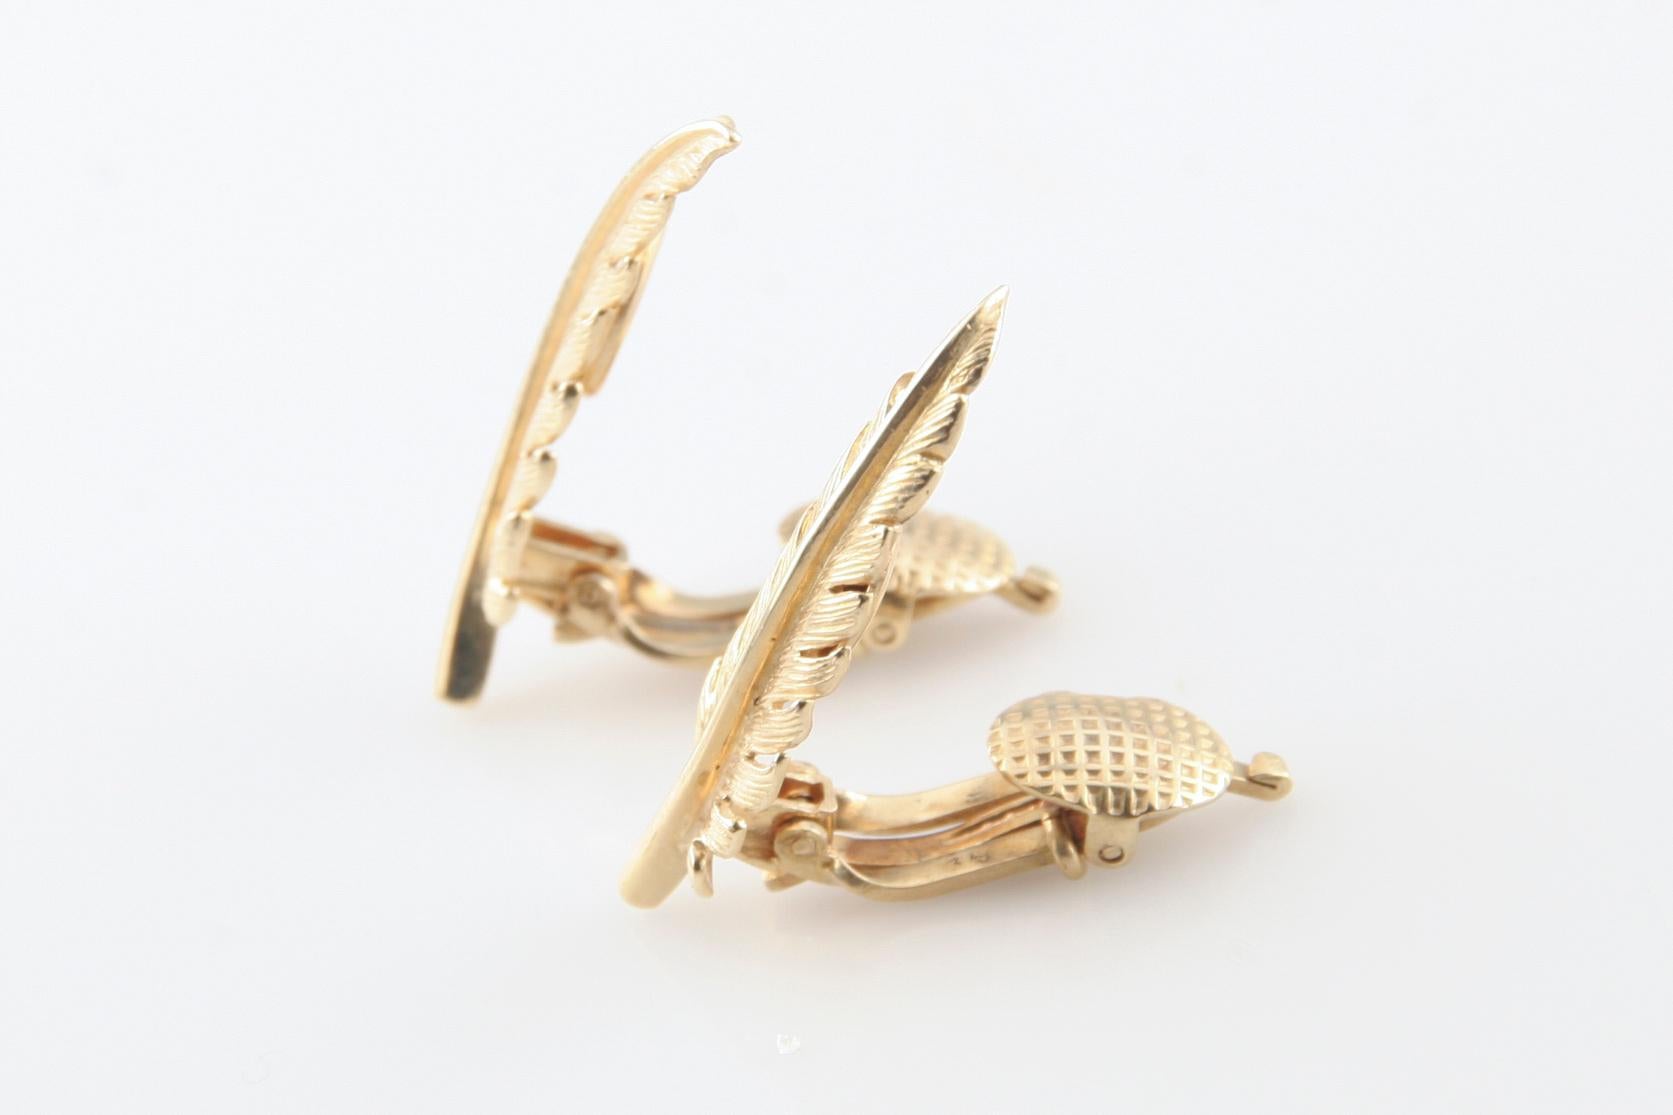 Tiffany & Co. 14kt Gold Fern Leaf Earrings
Simple, yet elegant, design that mimics the fern leaf found in nature
Beautiful craftsmanship and attention to detail that we all expect from Tiffany & Co.
Both earrings have the number 